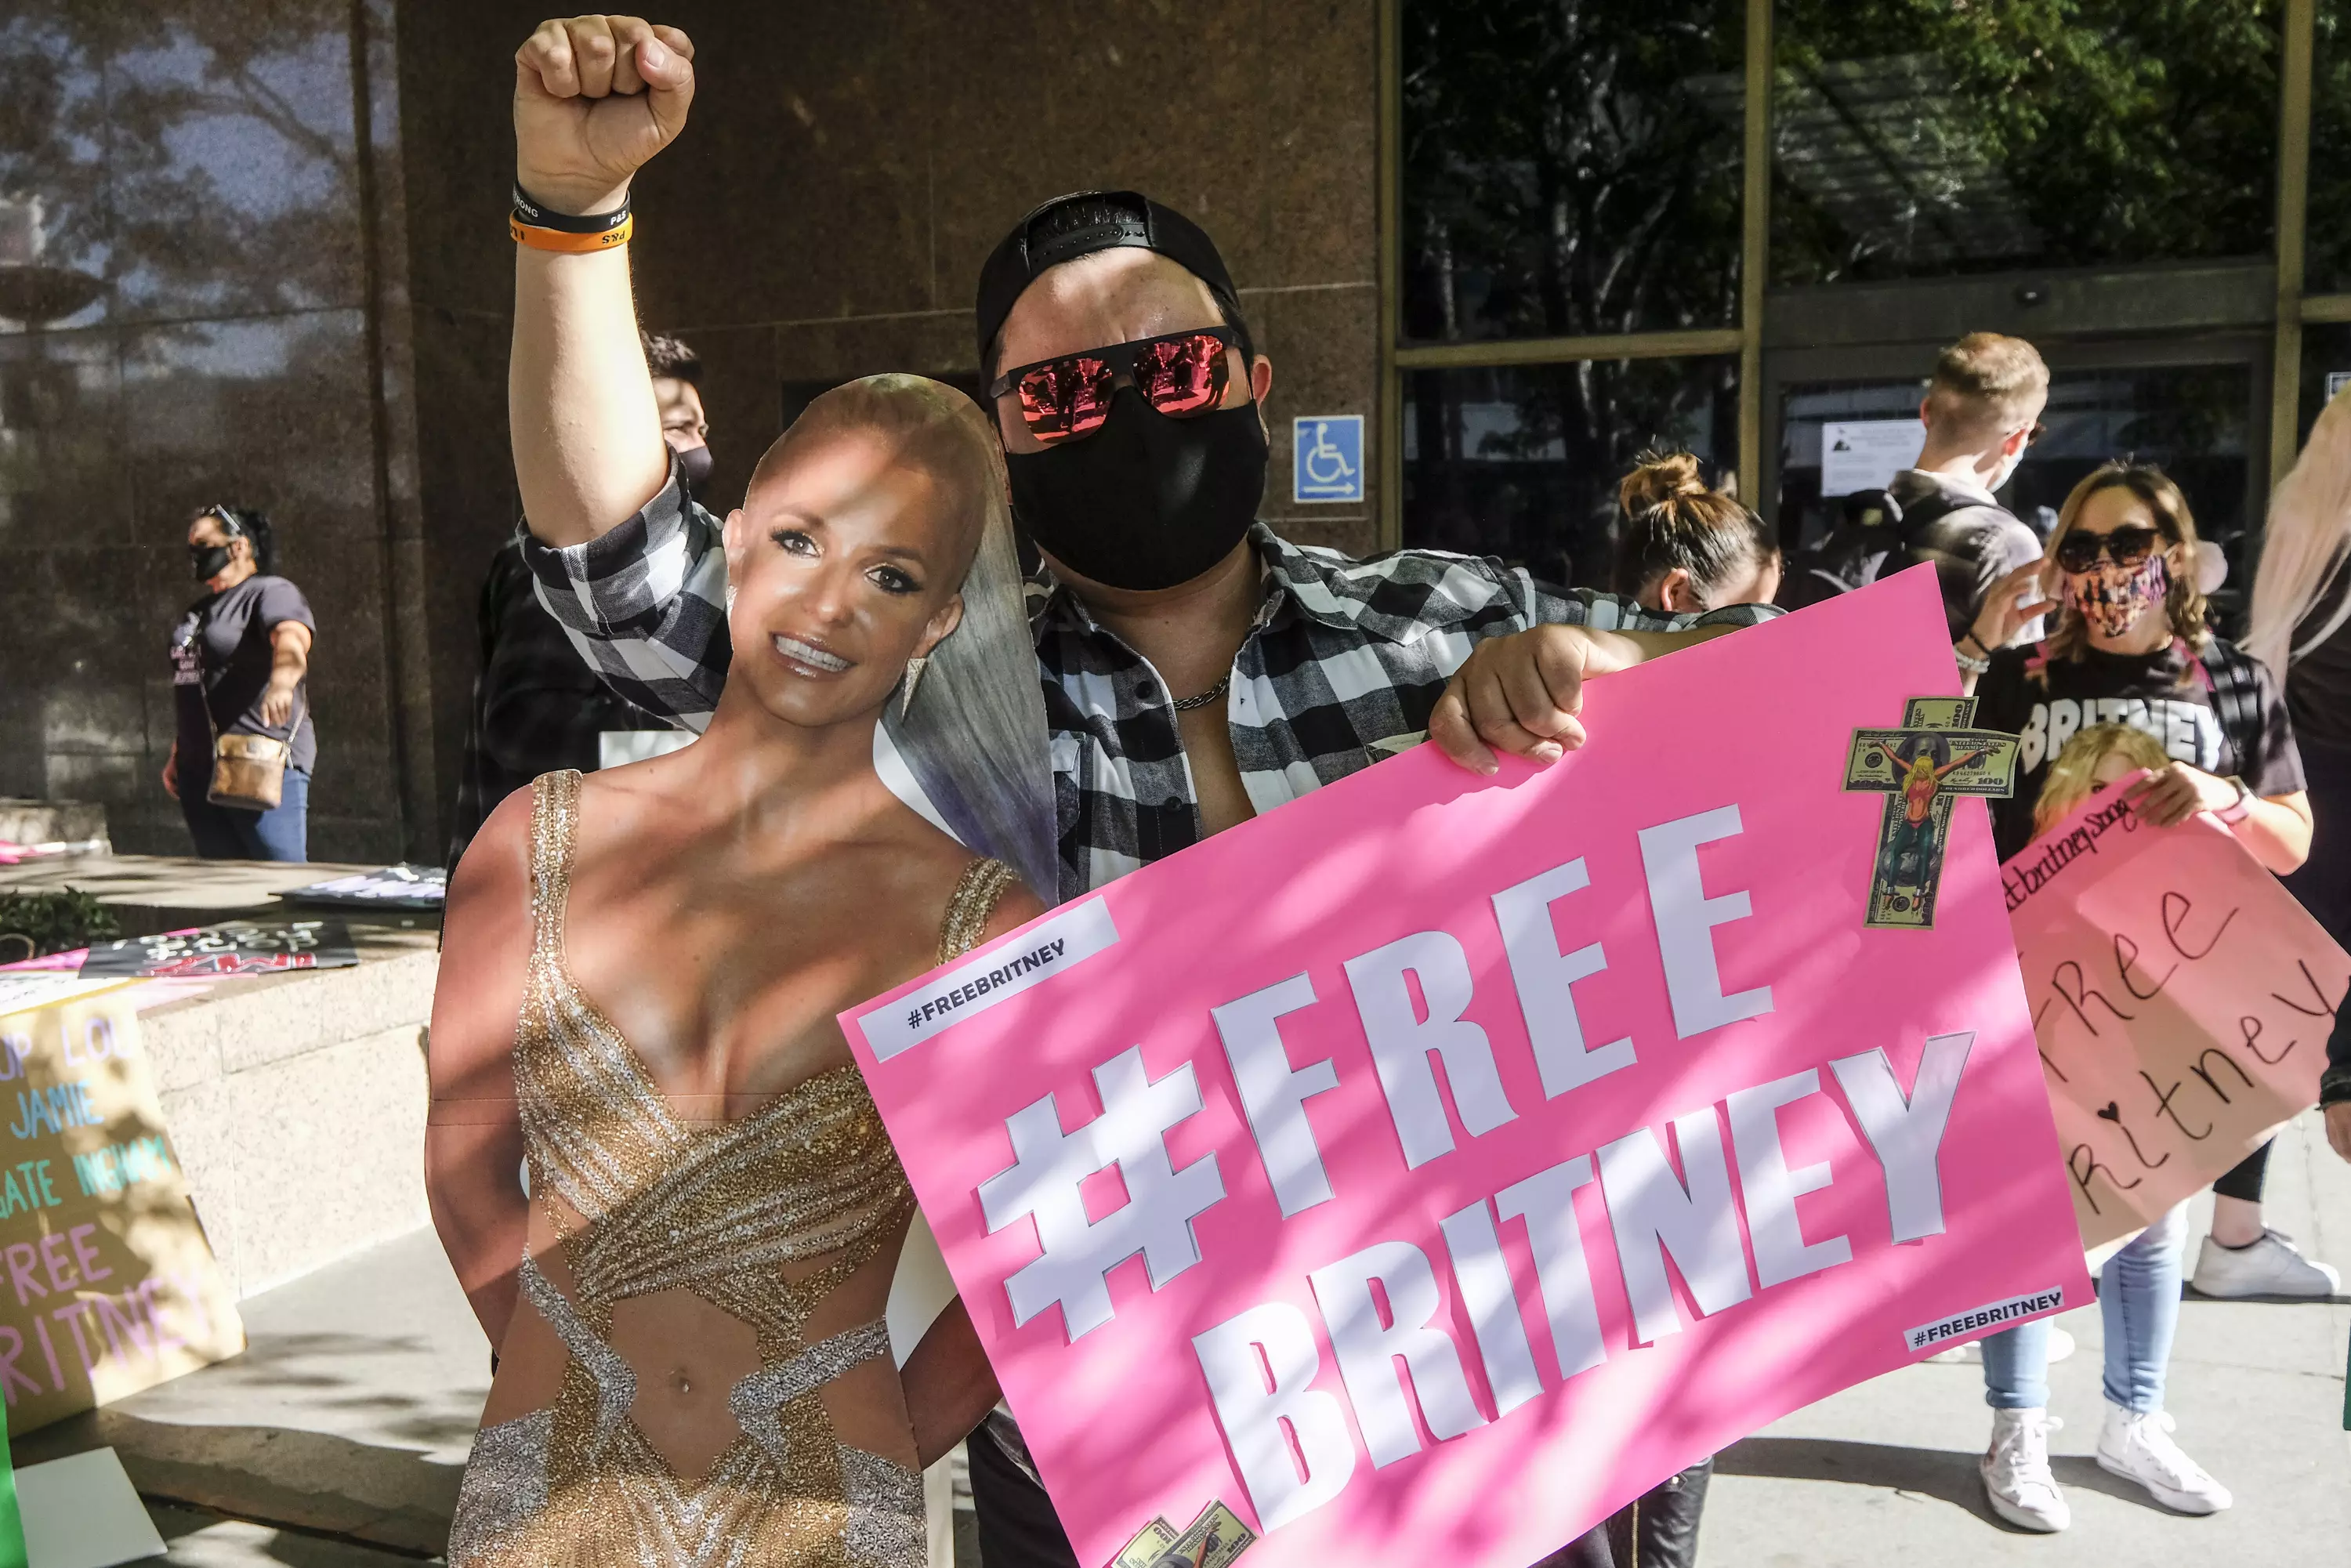 The #FreeBritney movement has raised awareness about the conservatorship ruled by Britney's father Jamie Spears (